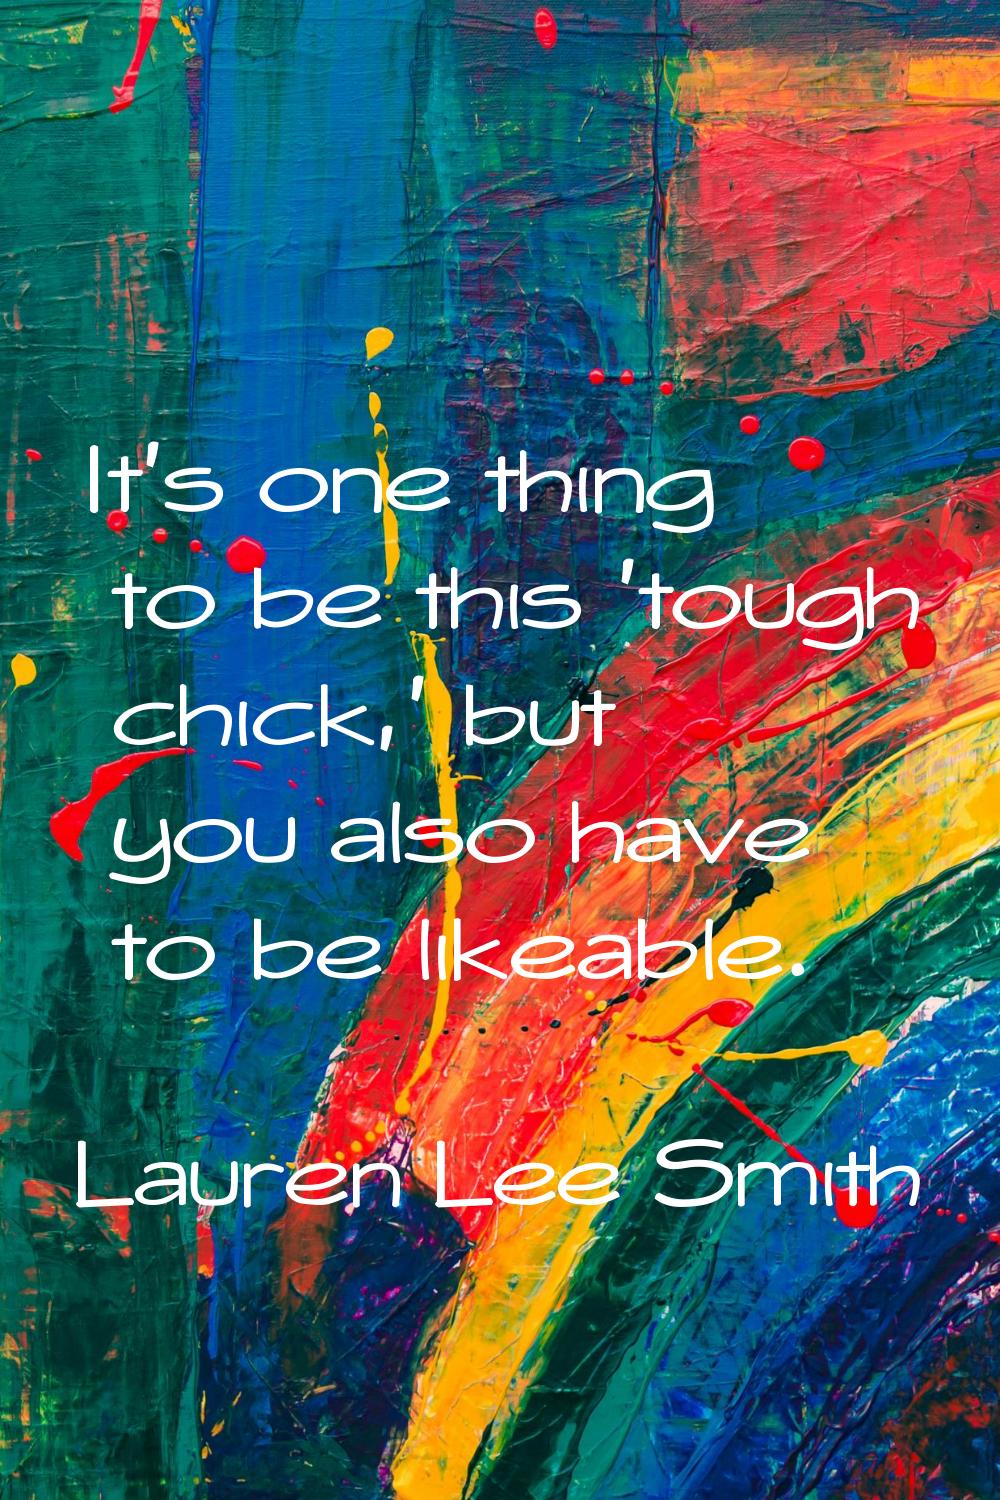 It's one thing to be this 'tough chick,' but you also have to be likeable.